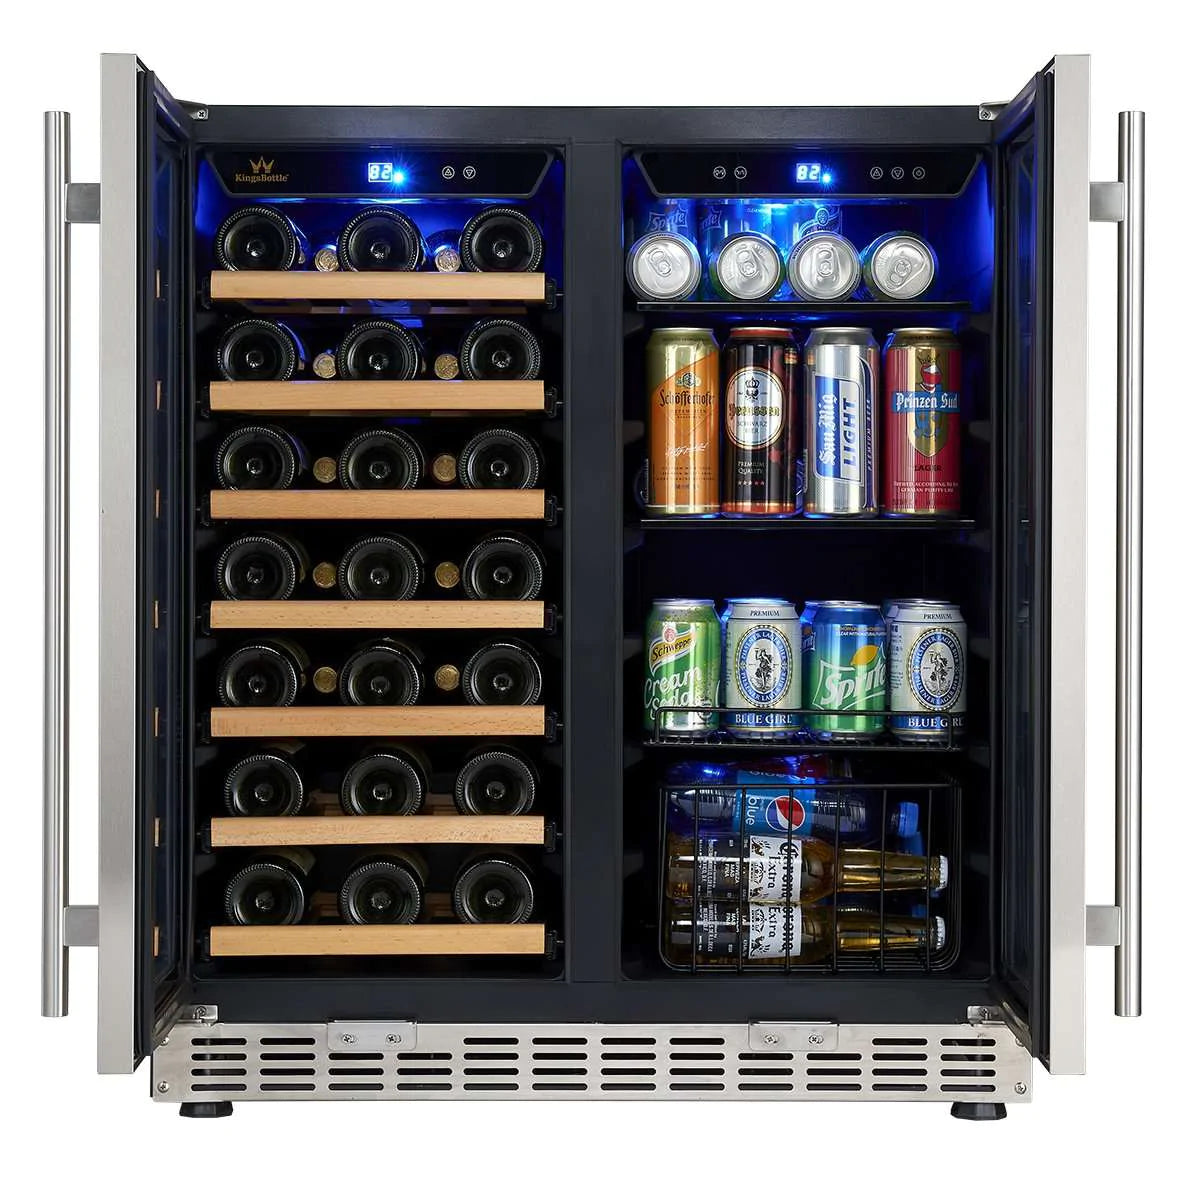 "Kingsbottle" 30" Under Counter Low-E Glass Door Wine and Beer Cooler Combo : KBUSF66BW-SS